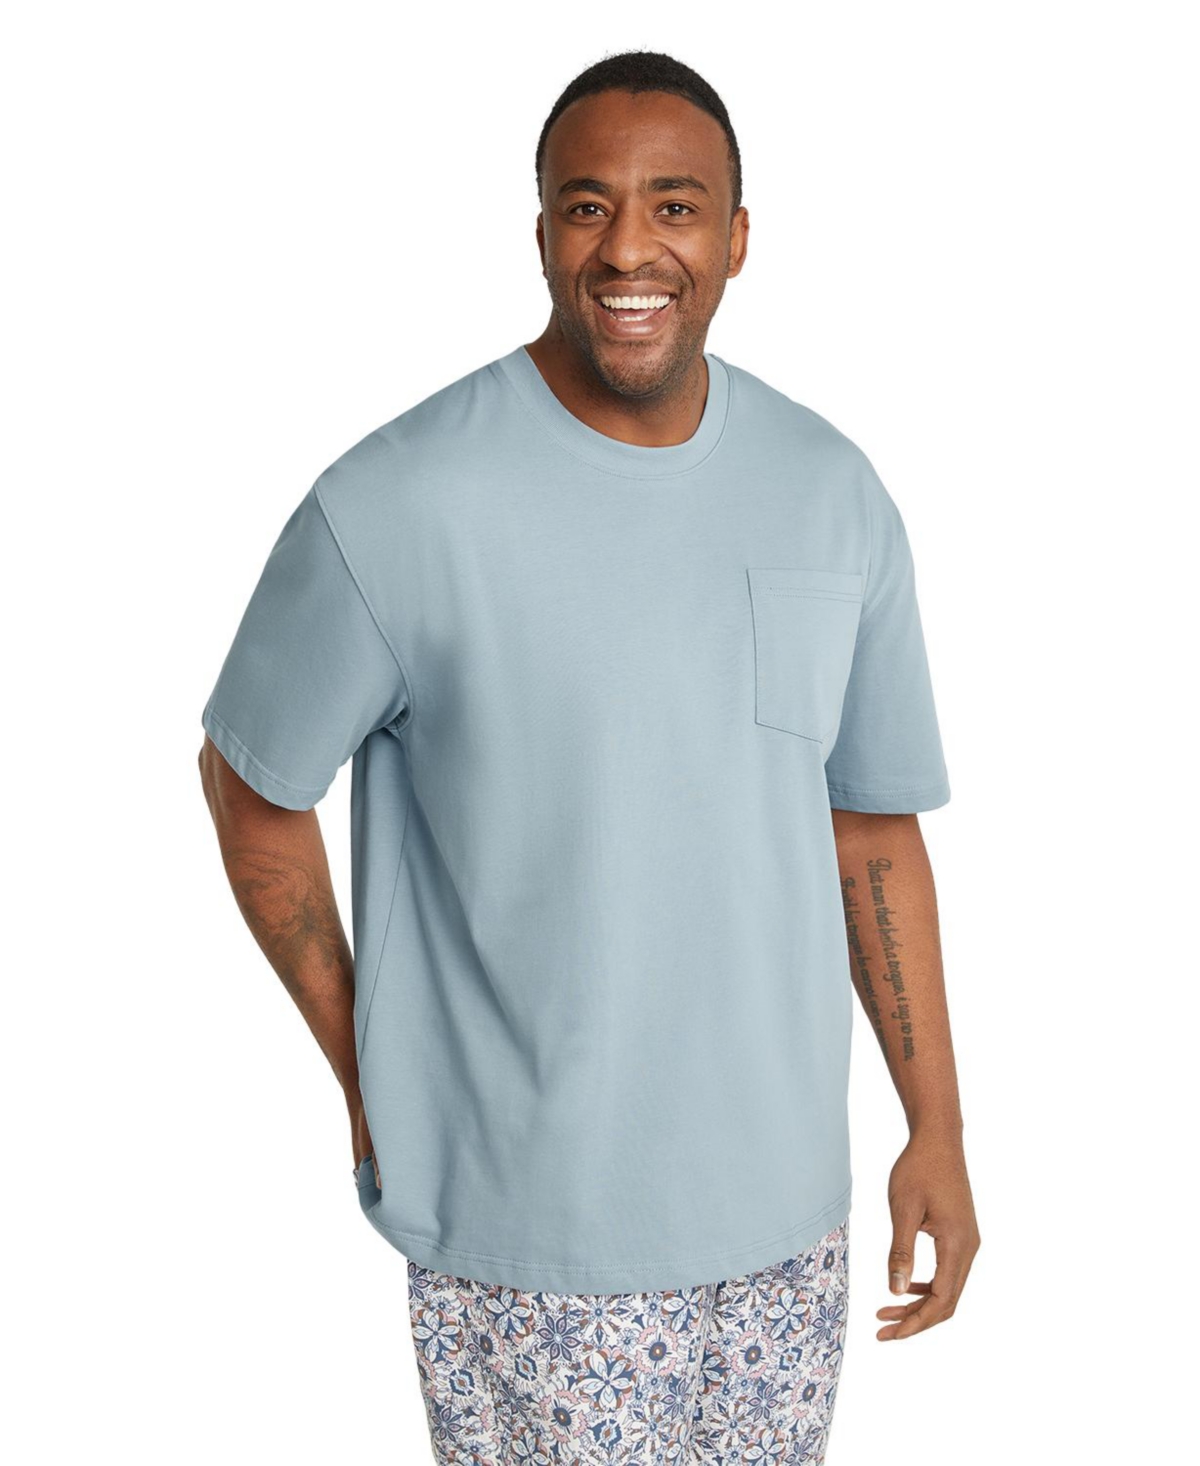 Men's Johnny g Relaxed Fit Tee - Sky